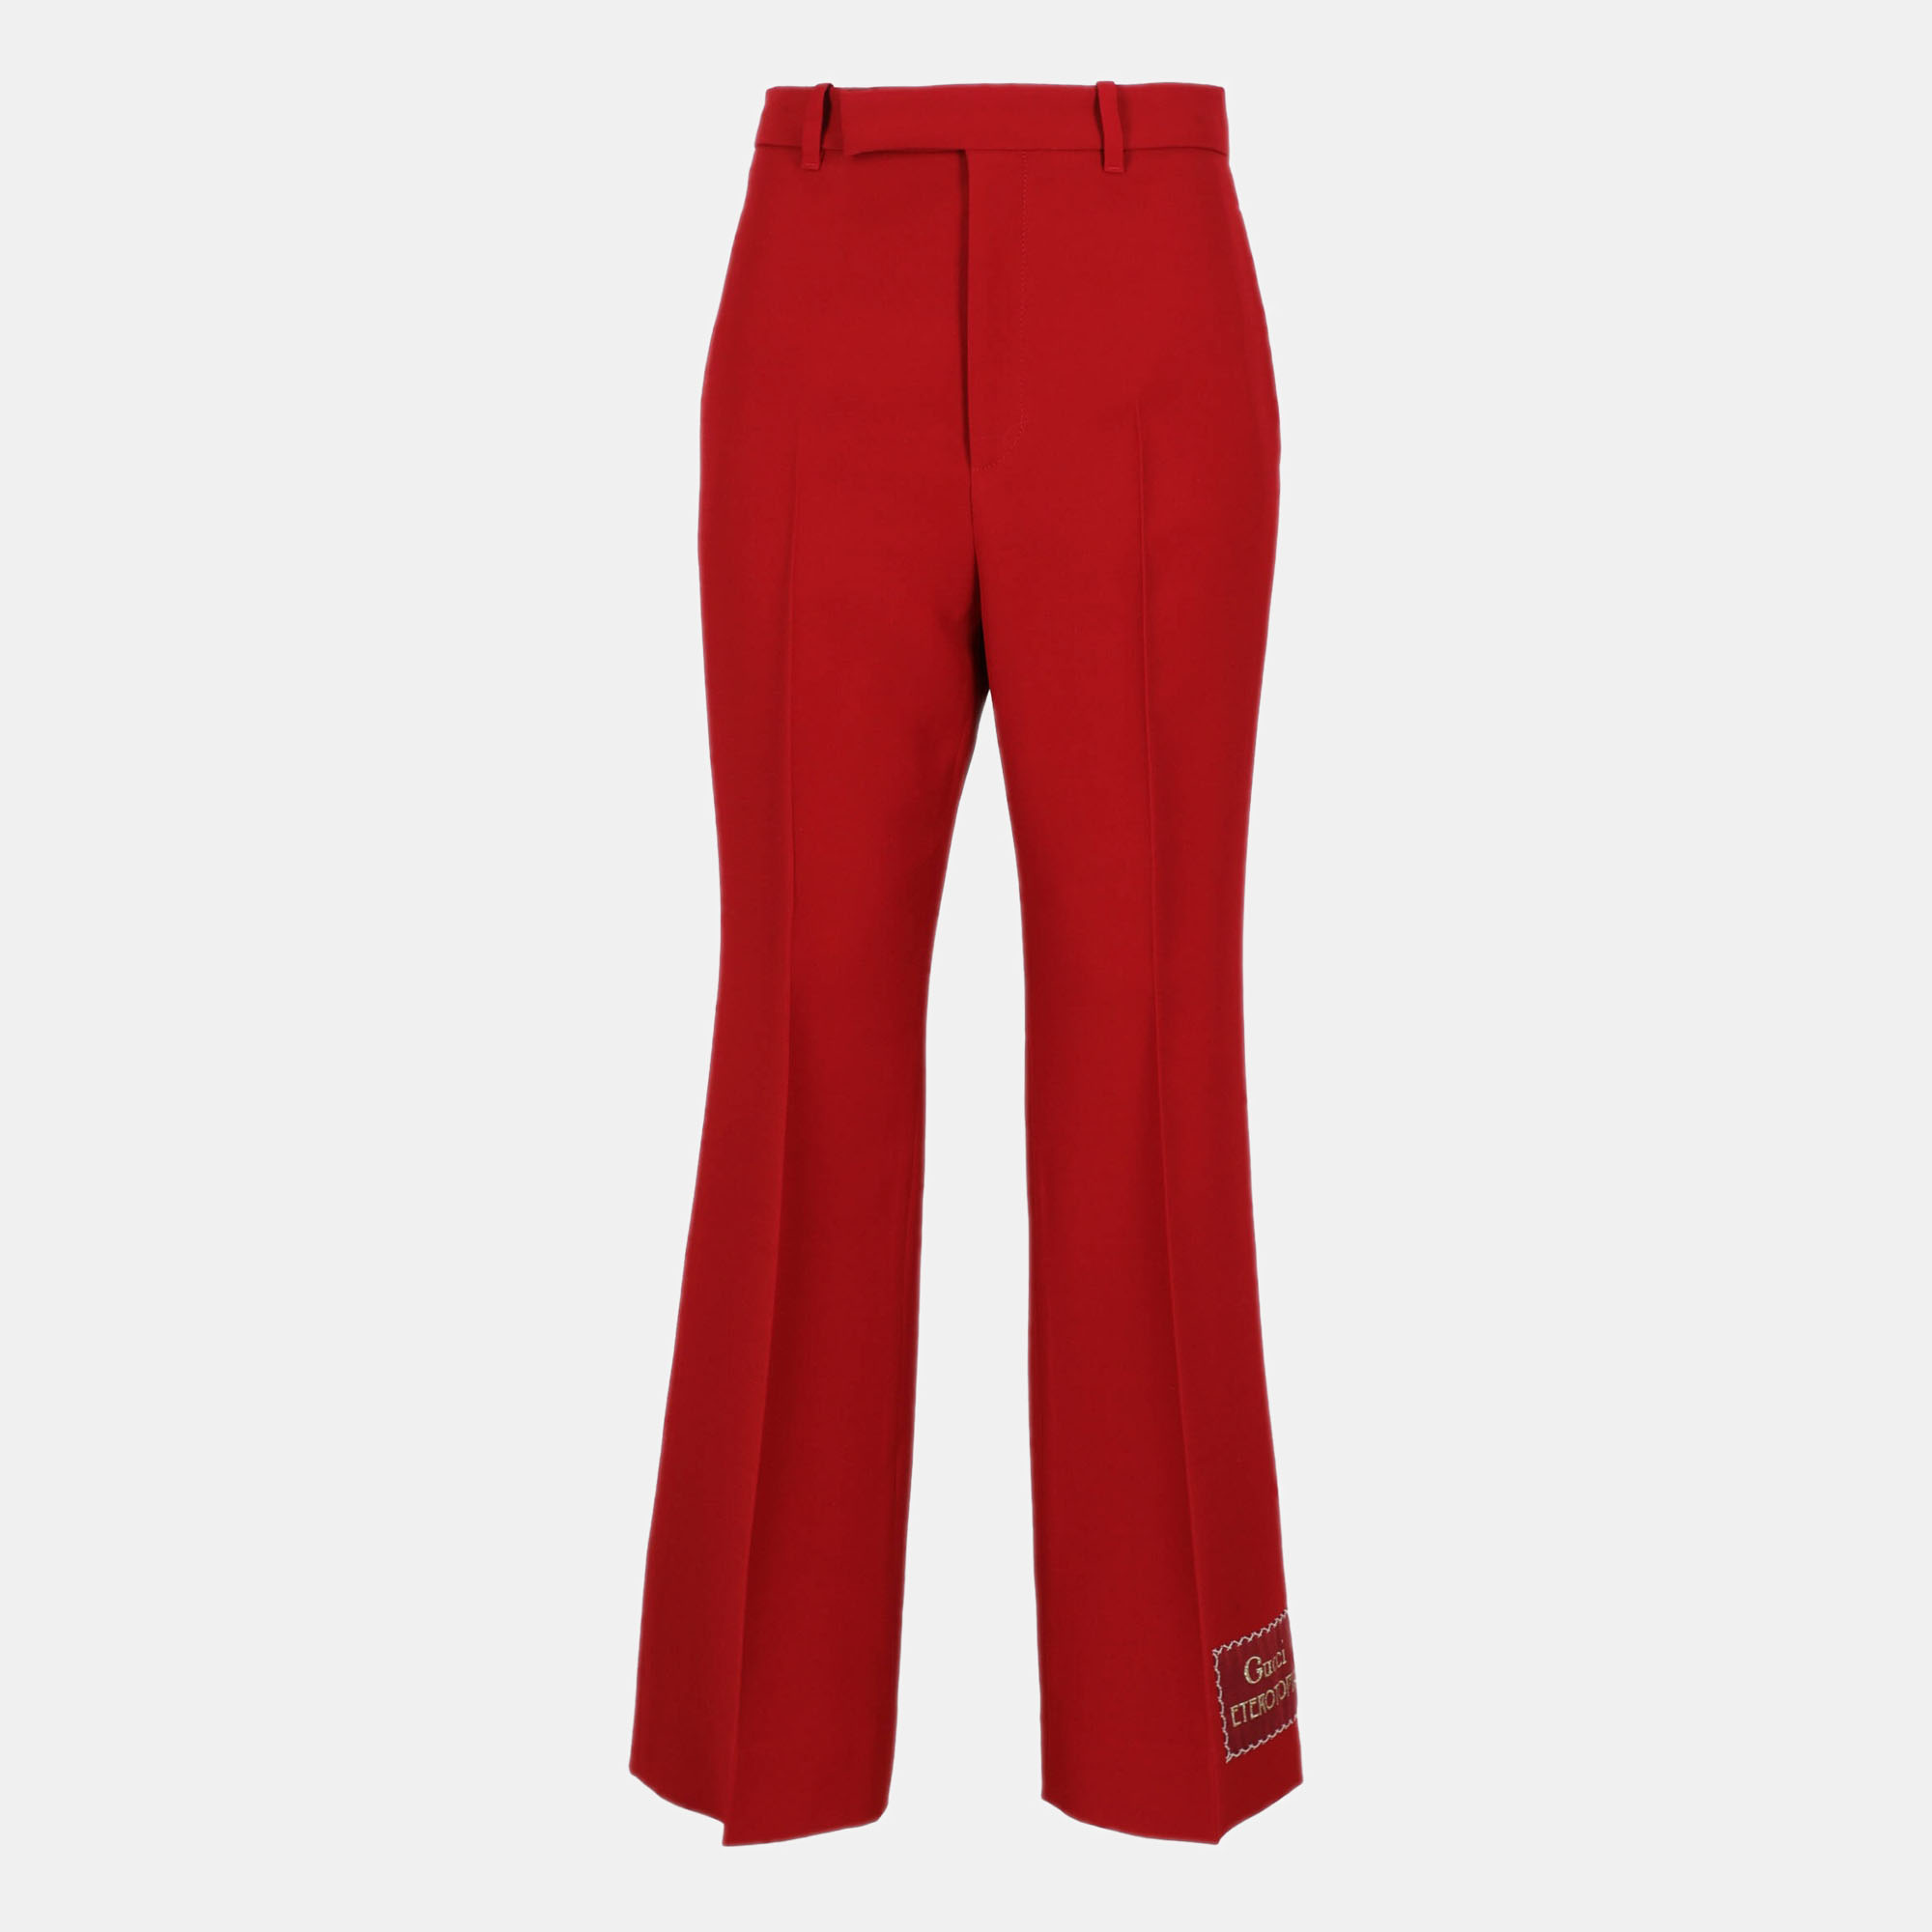 gucci women's silk trousers - red - s